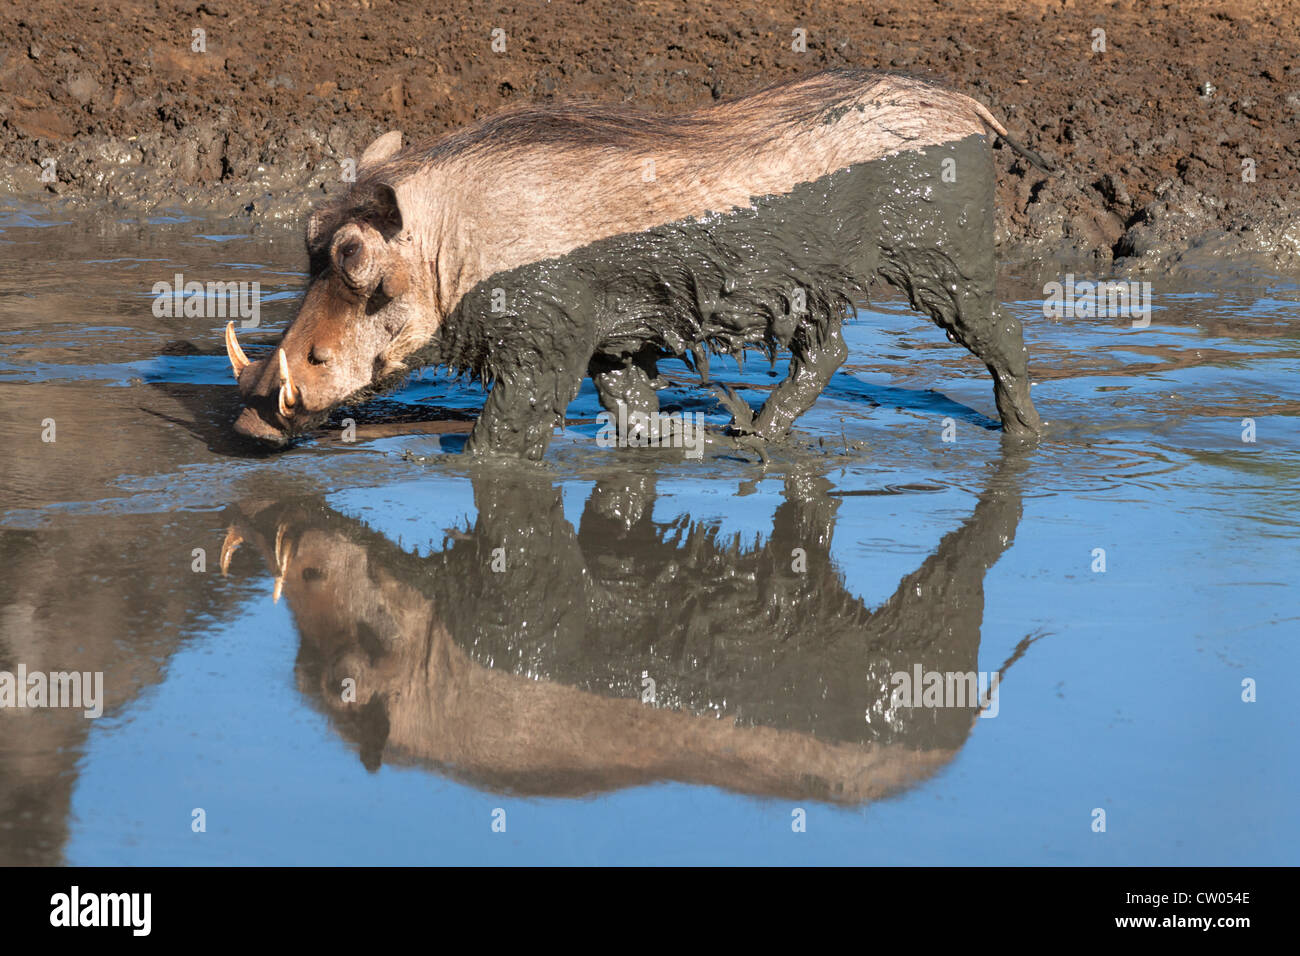 Warthog (Phacochoerus aethiopicus), at water, Mkhuze game reserve, South Africa Stock Photo